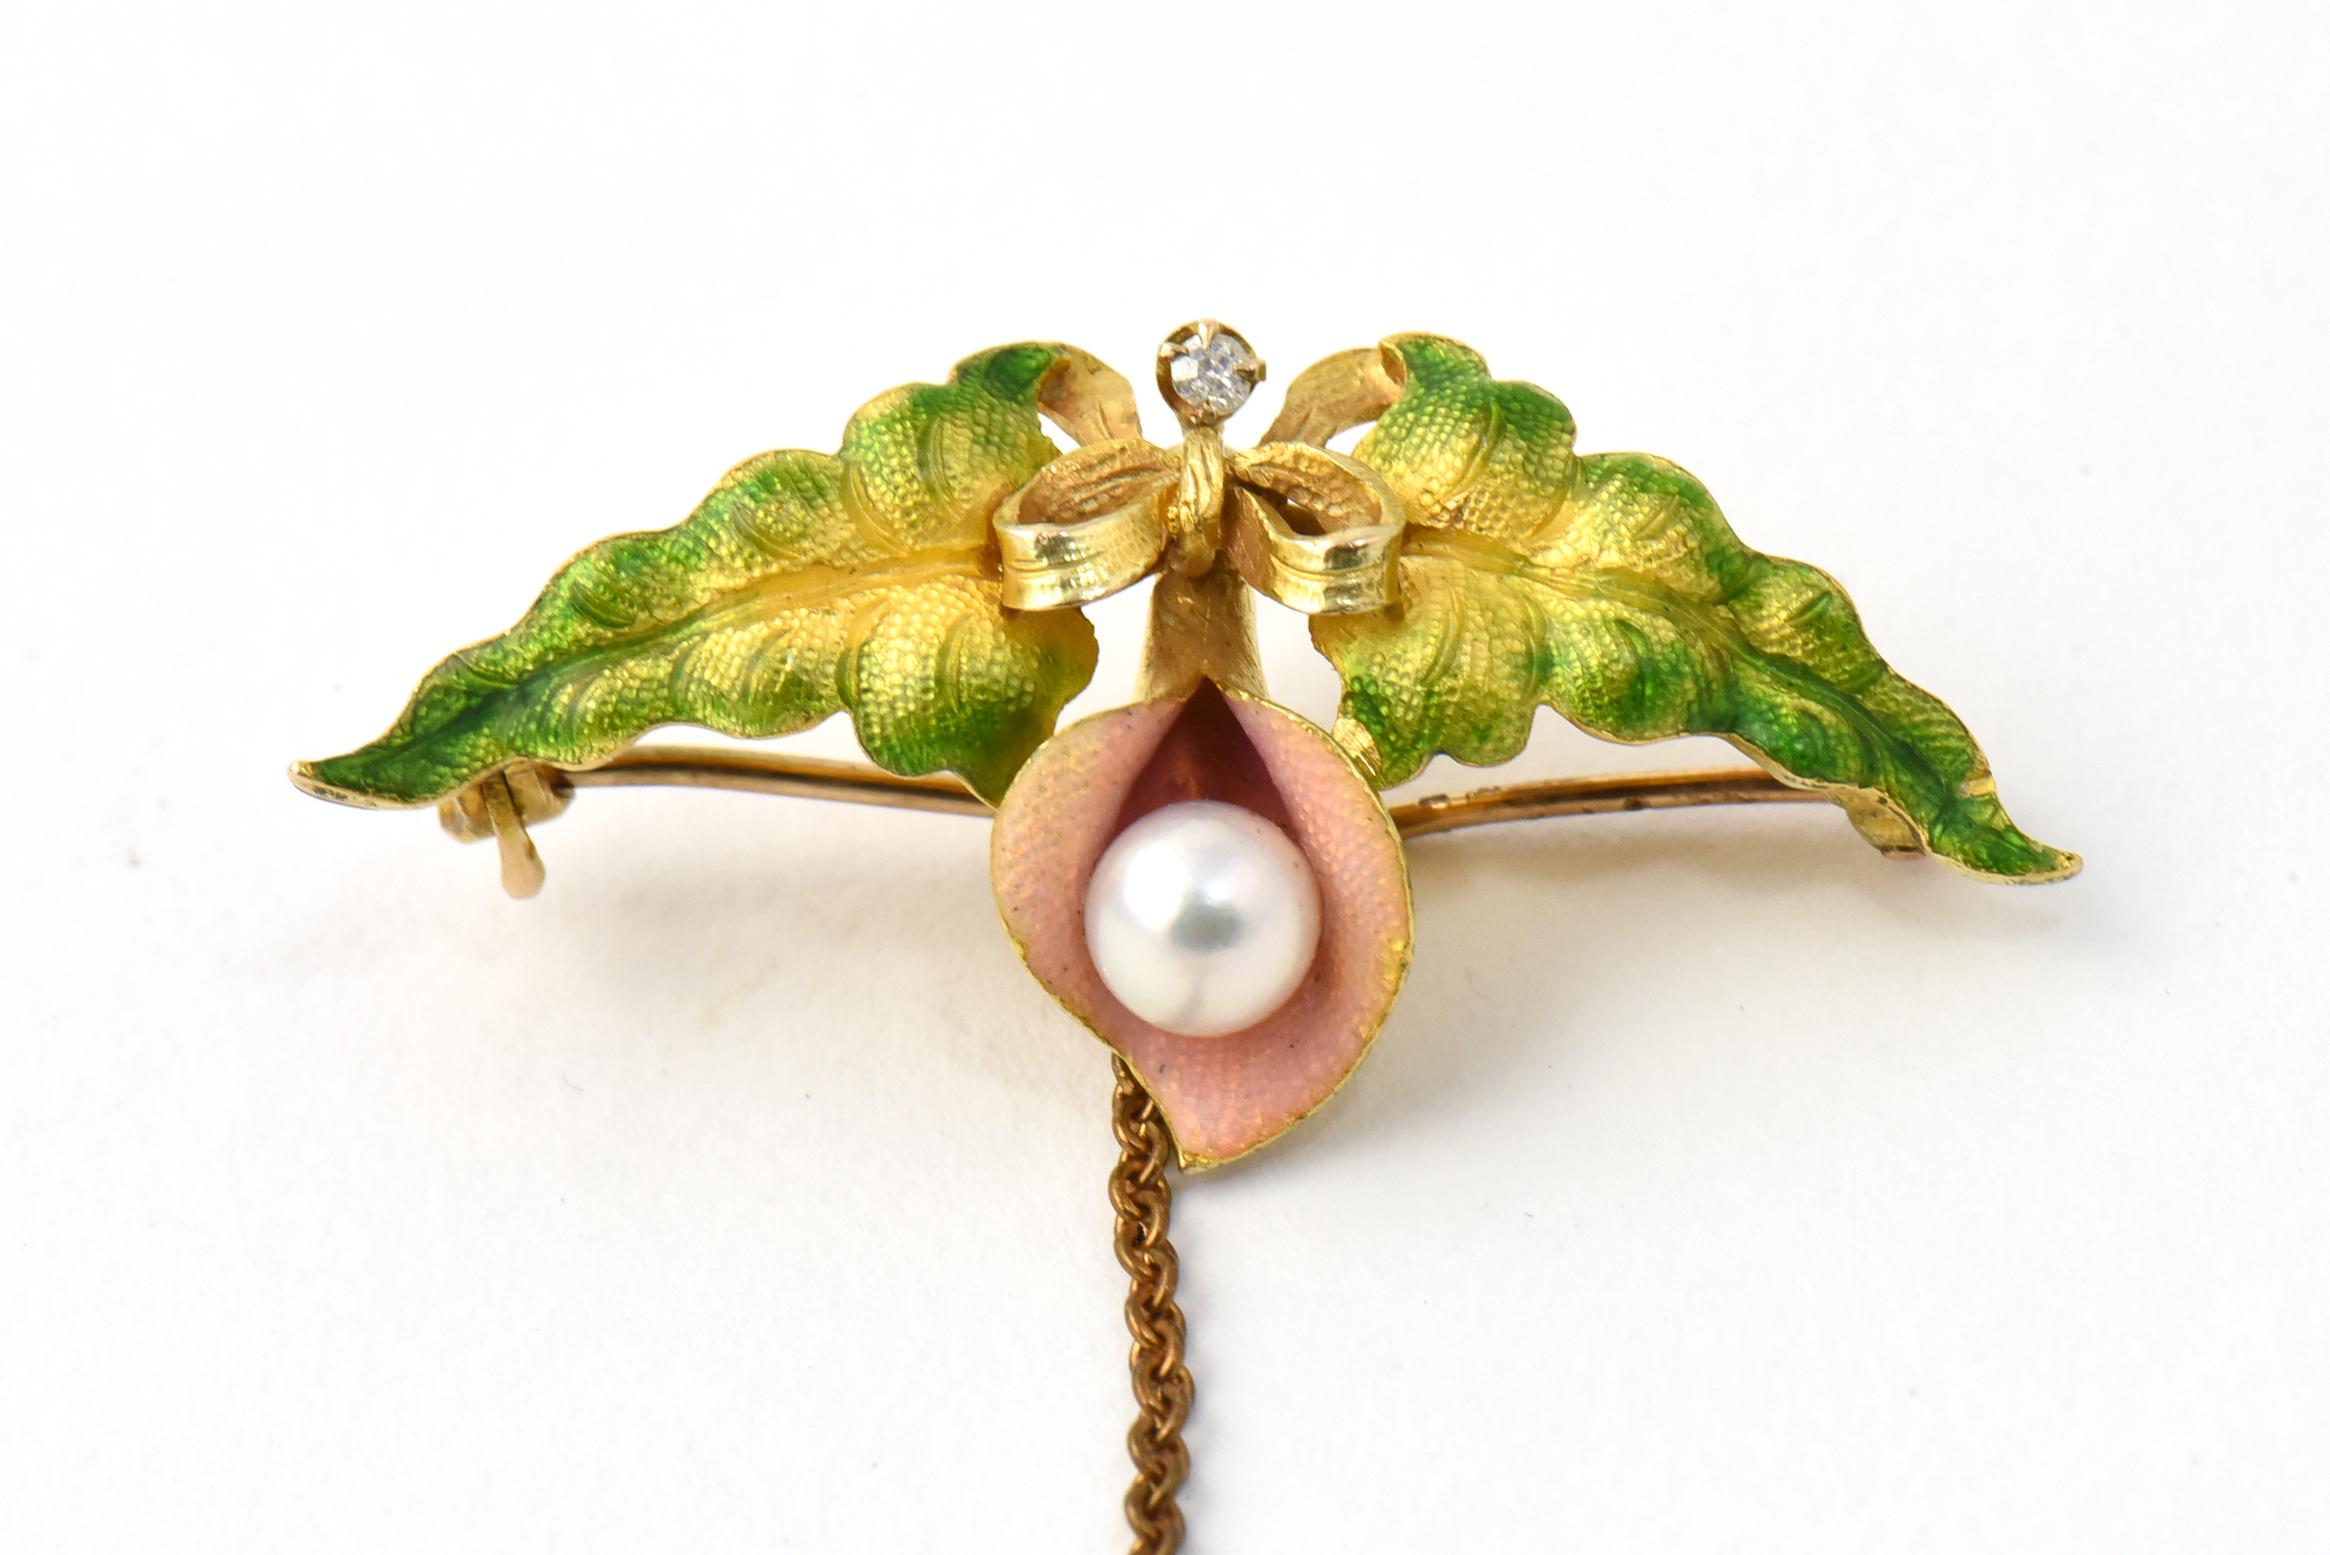 Krementz Art Nouveau enamel, pearl, and diamond two-piece brooch. Features a flower holding a pearl inside with a diamond-studded bow at the stem and two gold and green enamel leaves that almost look like wings. The bottom brooch has two matching